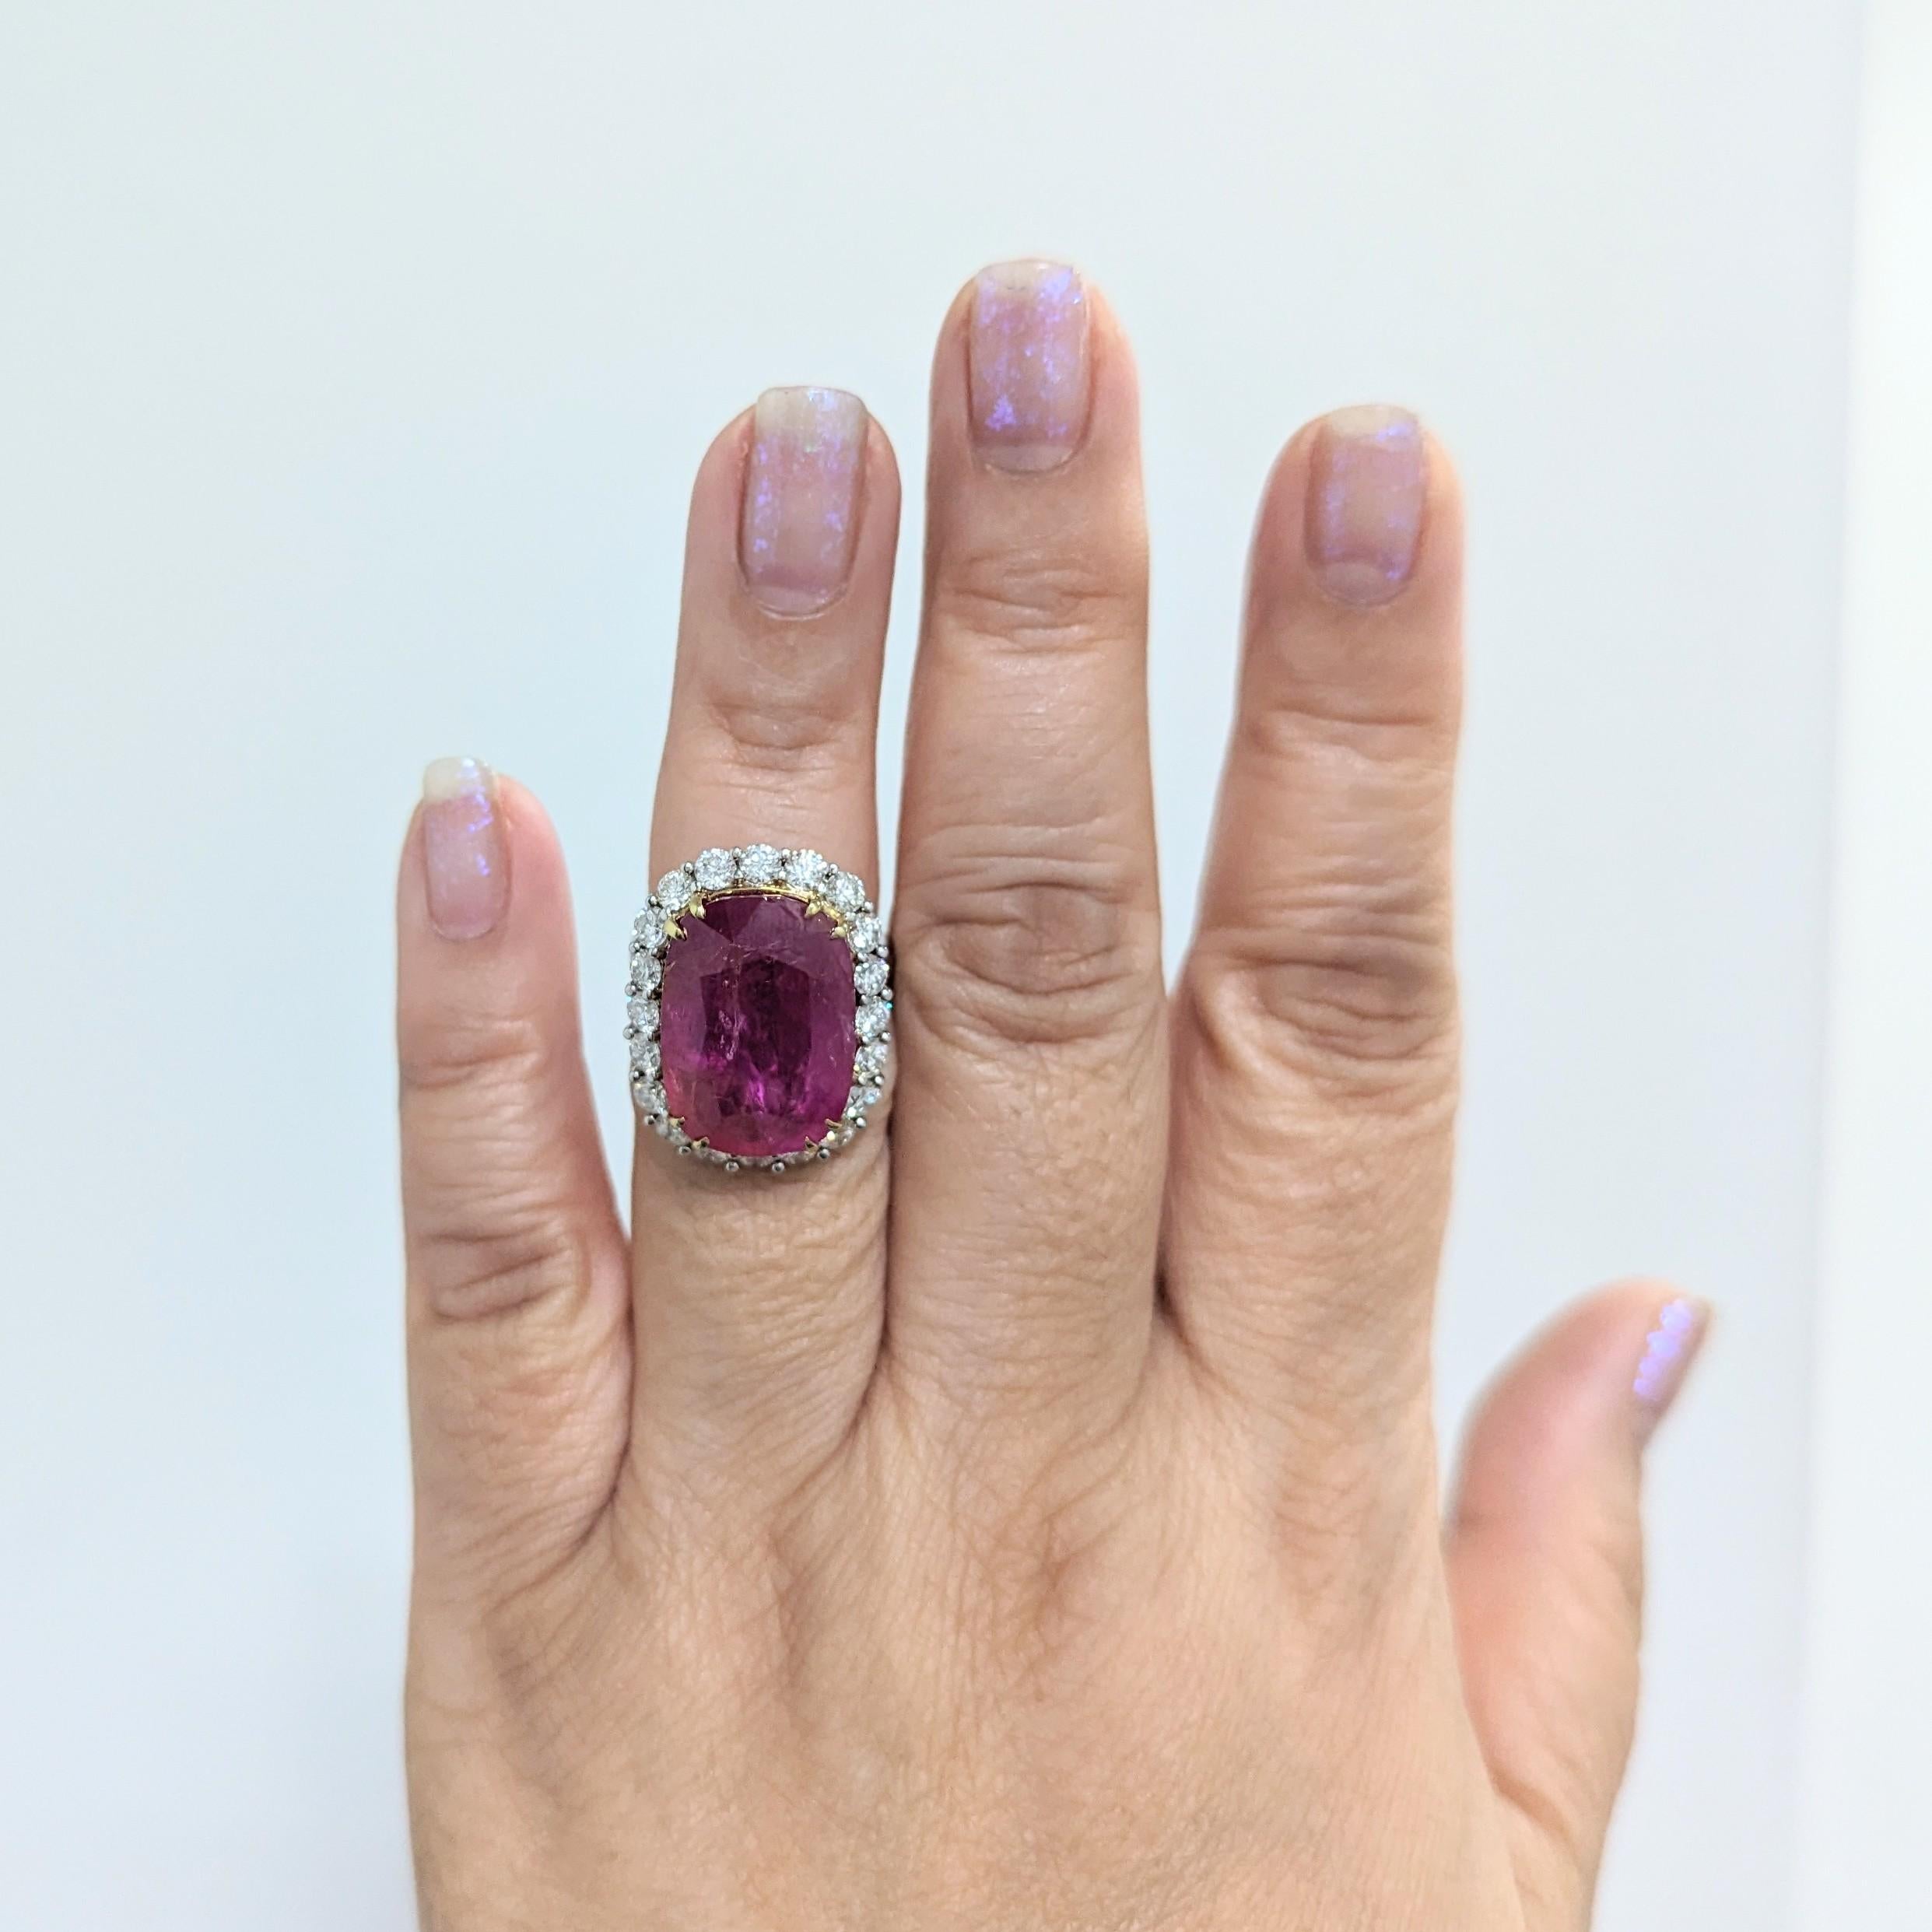 Gorgeous 22.02 ct. unheated Burma ruby cushion with good quality, white, and bright diamond rounds.  Handmade in platinum and 18k yellow gold.  Ring size 6+.  Comes with C. Dunaigre certificate.